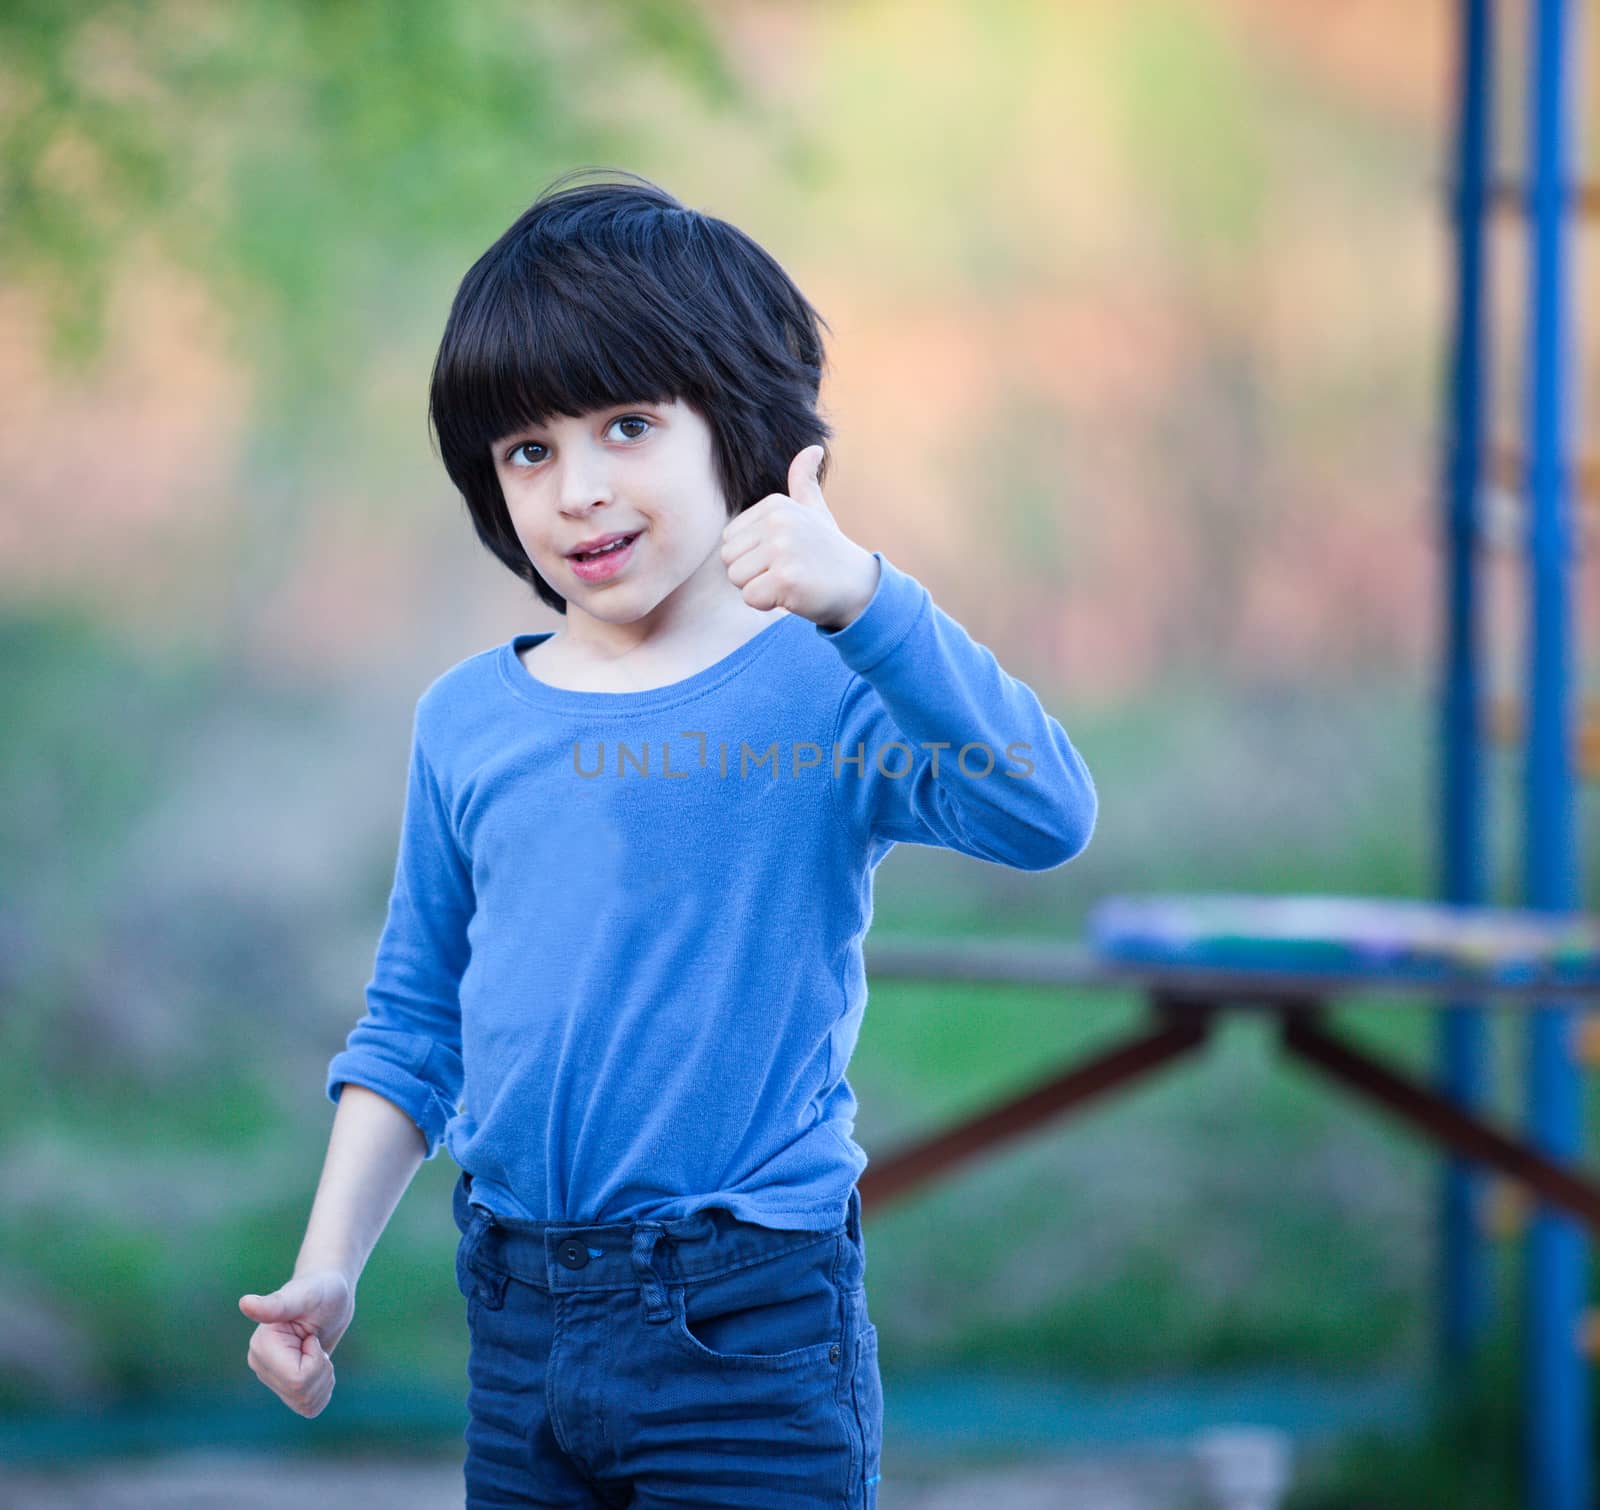 smiling black-haired boy in blue shirt showing a thumbs up